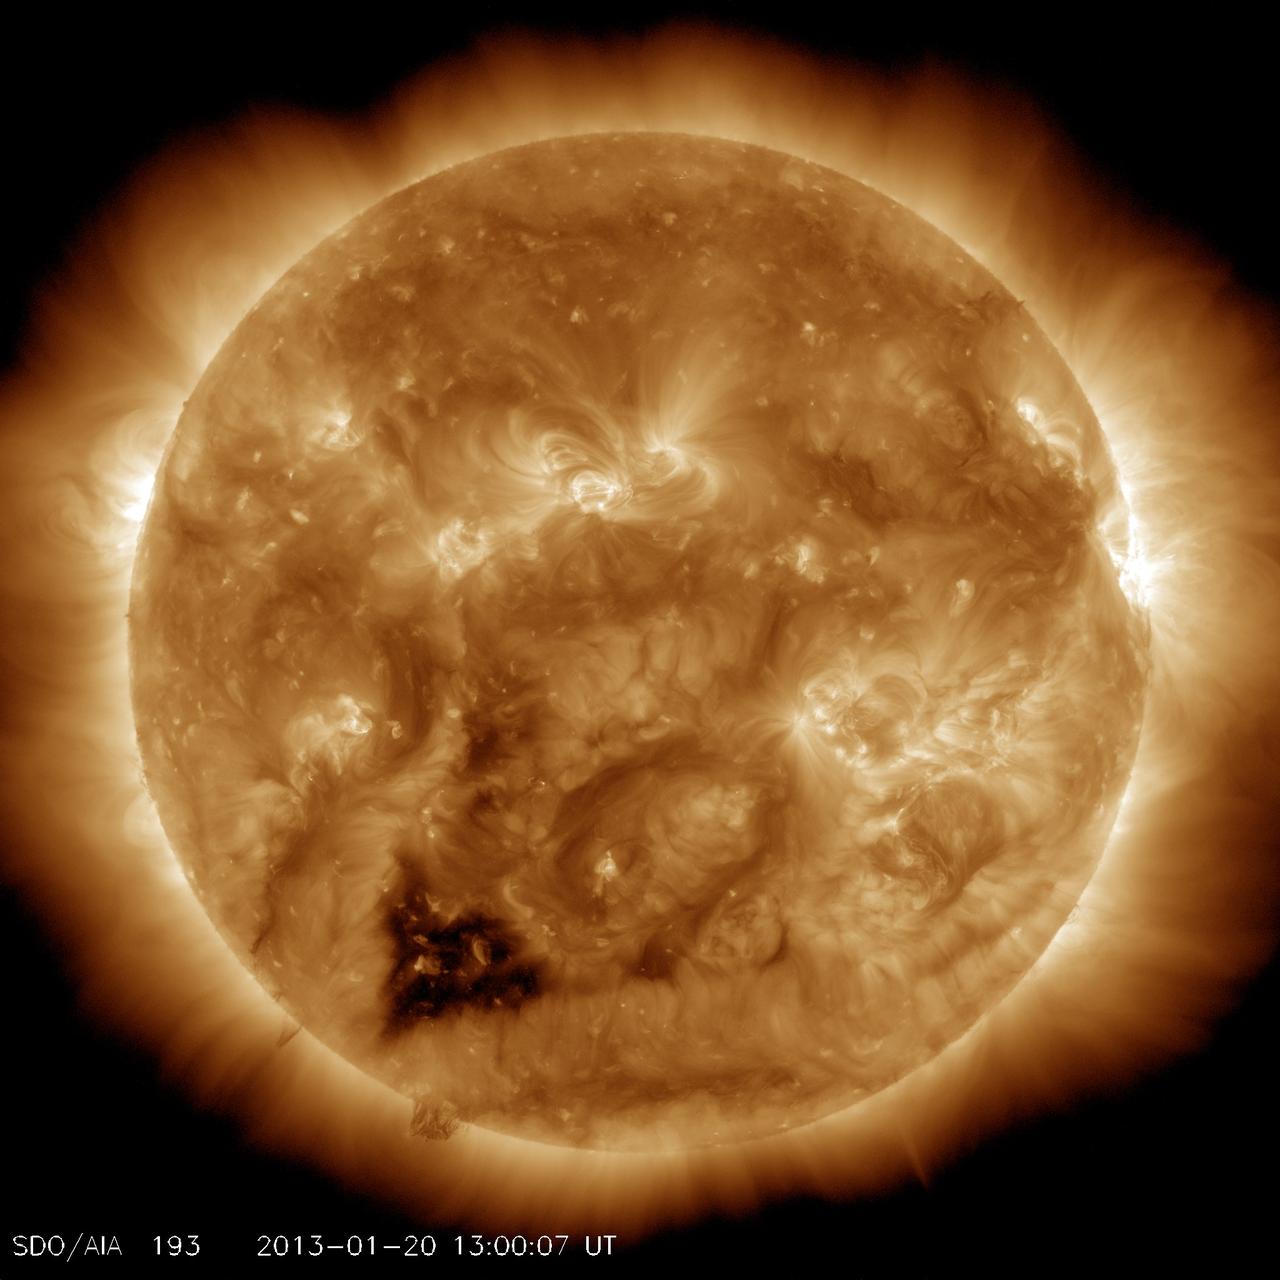 An ultraviolet view of the Sun, which appears as a peach-colored, glowing ball with soft rays shining around its circumference. In addition to brighter and darker swirls of light on the Sun's surface, a small dark area in its lower left is shaped slightly like a heart.